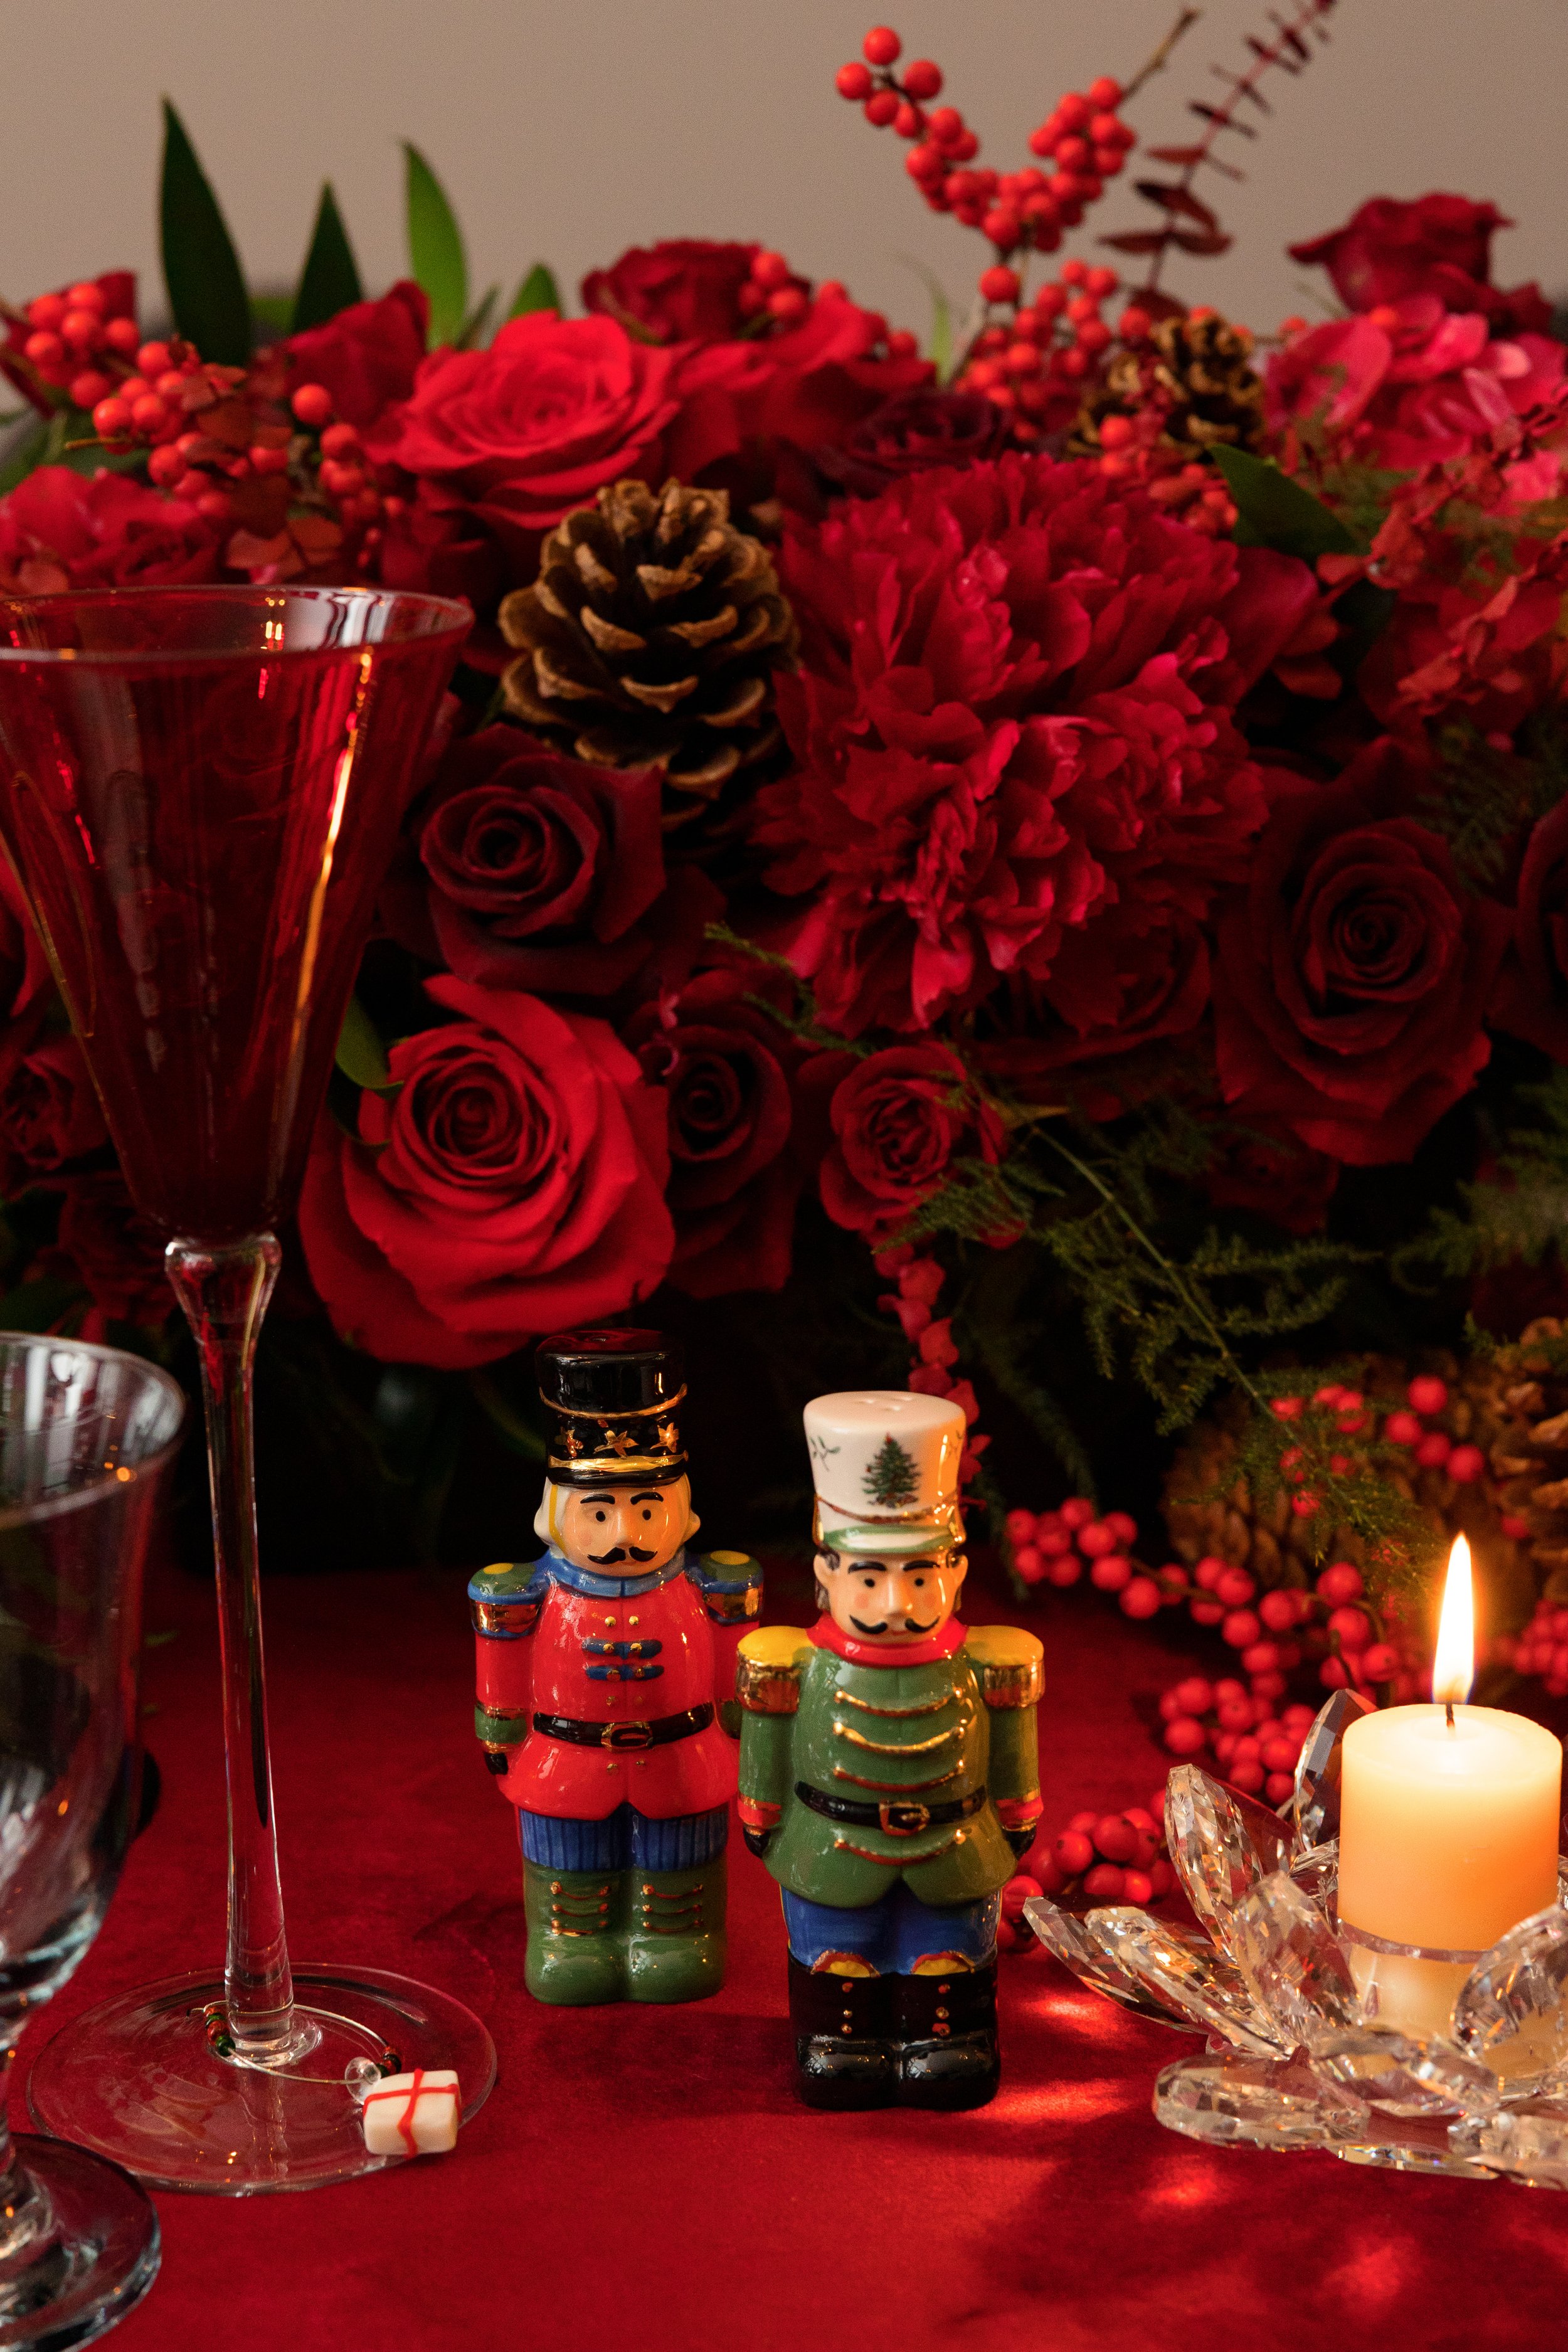 5 Easy Ways to Create a Decadent and Festive Christmas Table